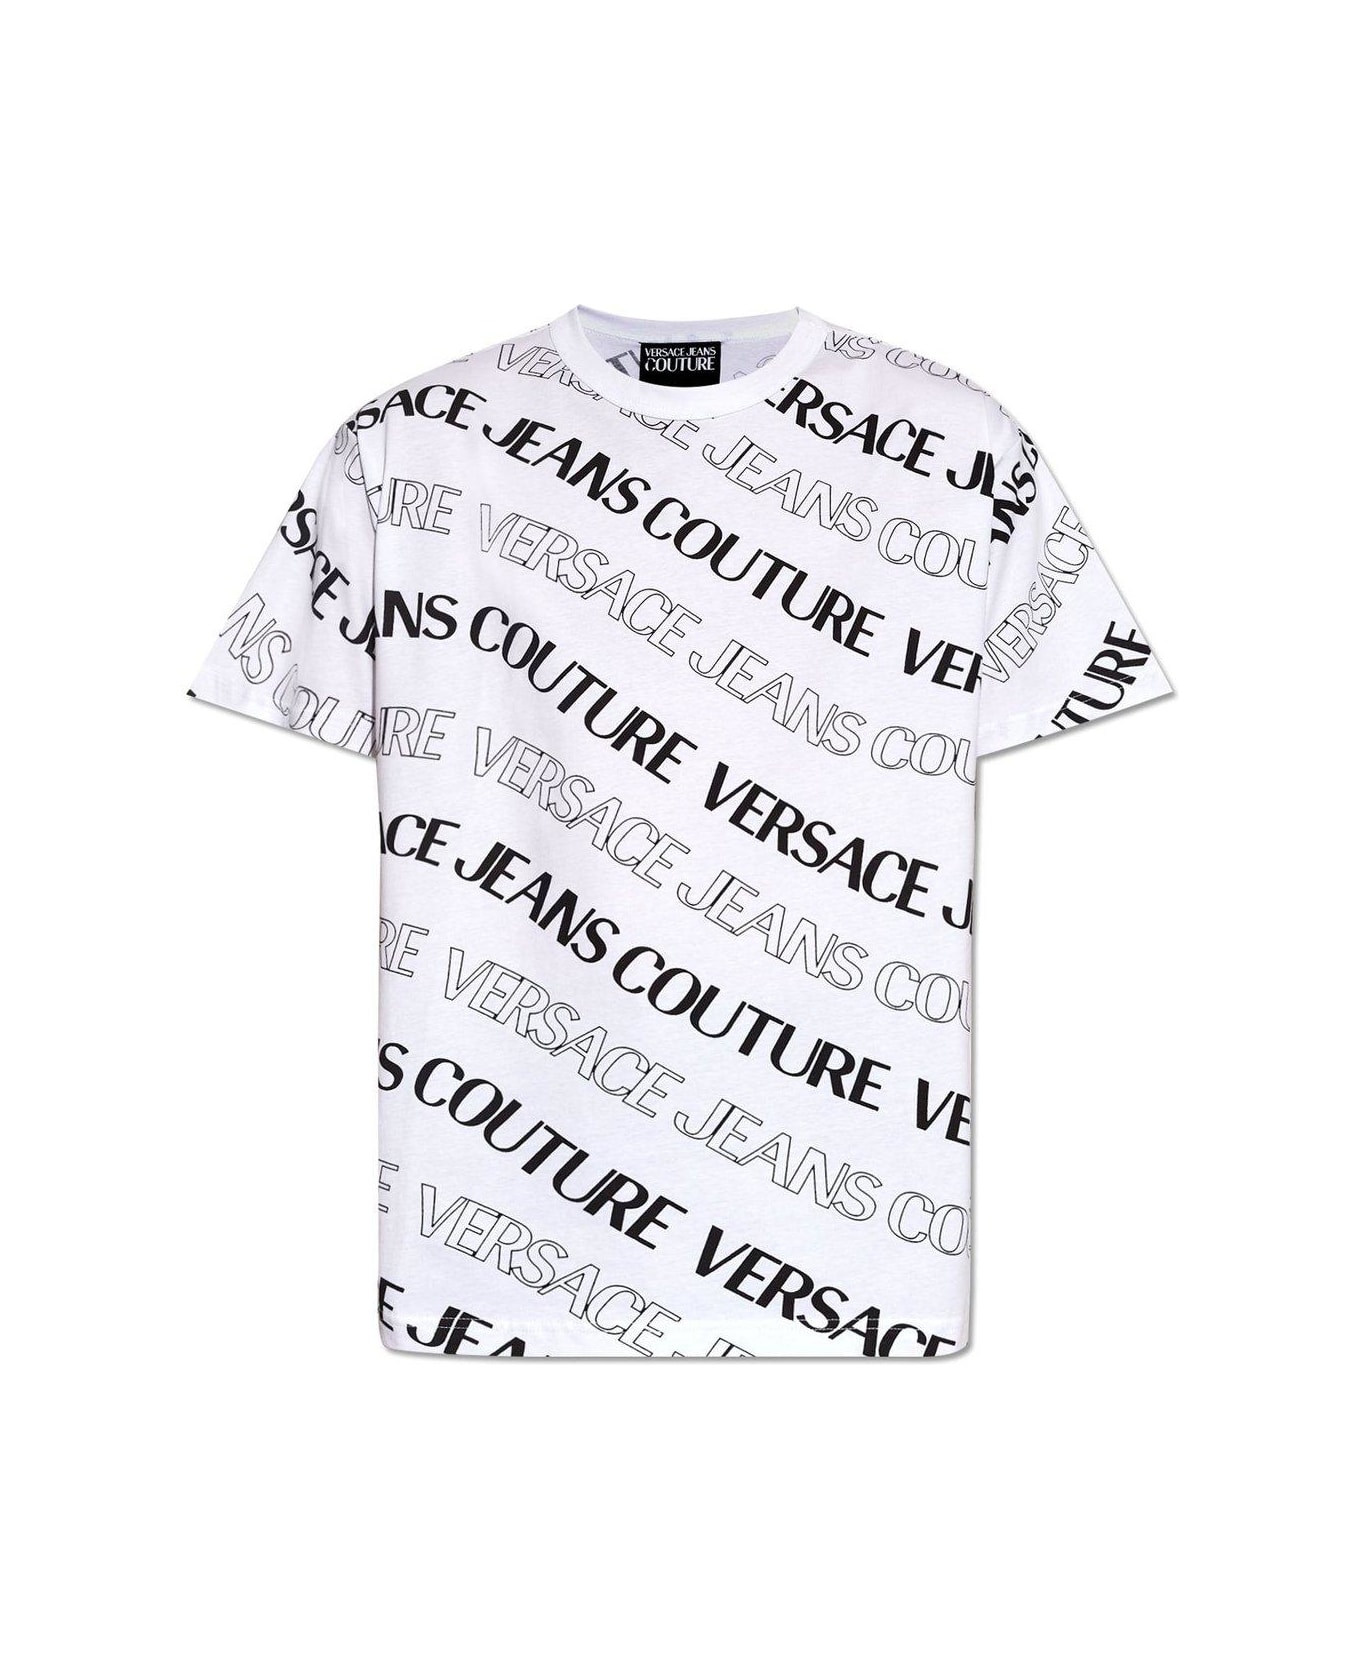 Versace Jeans Couture Allover Logo Printed Crewneck T-shirt - White